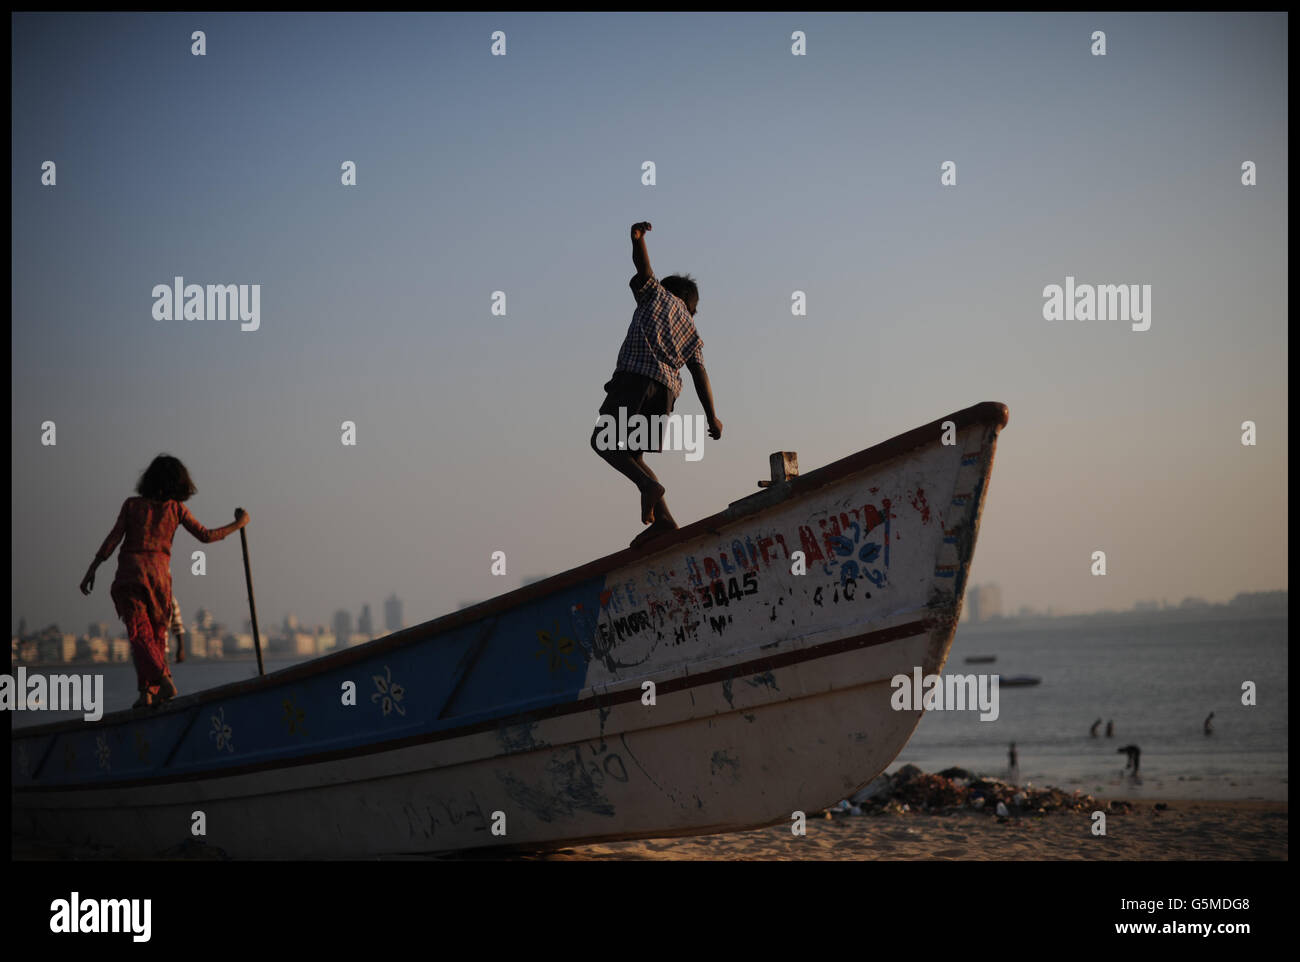 Stock photographs of Chowpatty Beach in Mumbai PRESS ASSOCIATION Photo. Picture date: Saturday November 30 2012. See PA story. Photo credit should read: Stefan Rousseau/PA Stock Photo